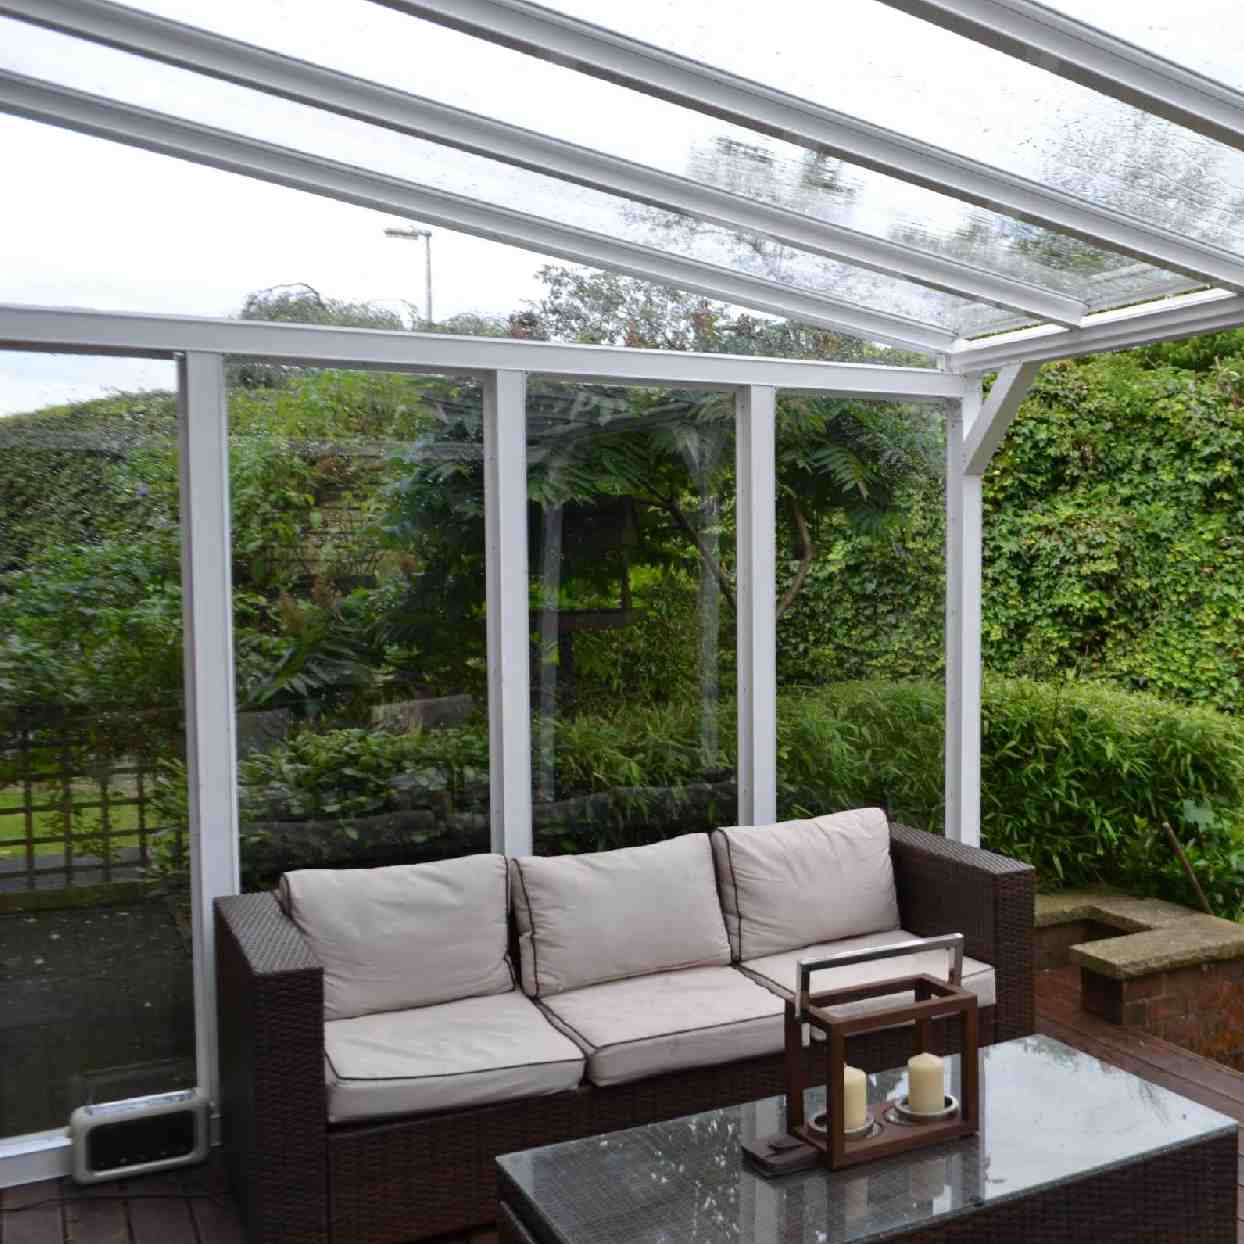 Buy Omega Verandah White with 16mm Polycarbonate Glazing - 8.4m (W) x 1.5m (P), (4) Supporting Posts online today